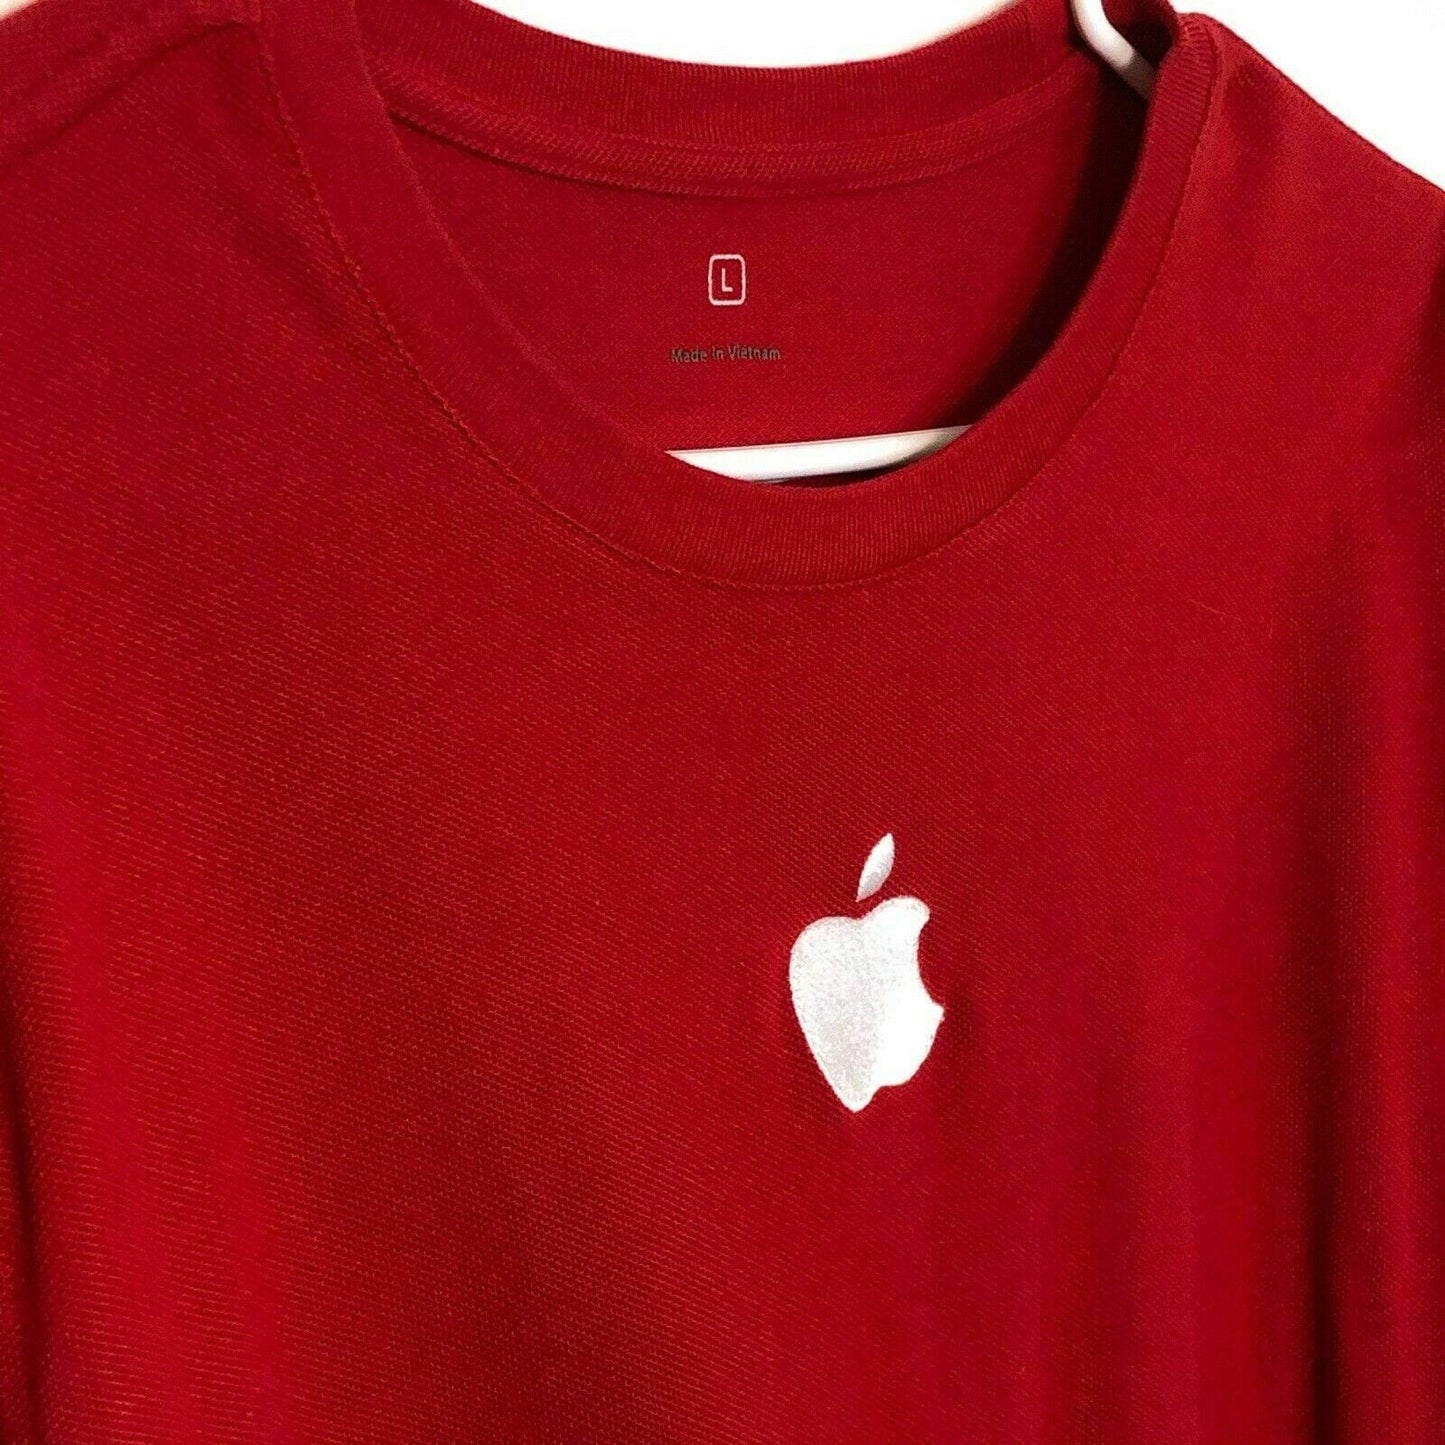 Apple Logo Men Red T-Shirt Size L Employee Only White Embroidered Apple.Com